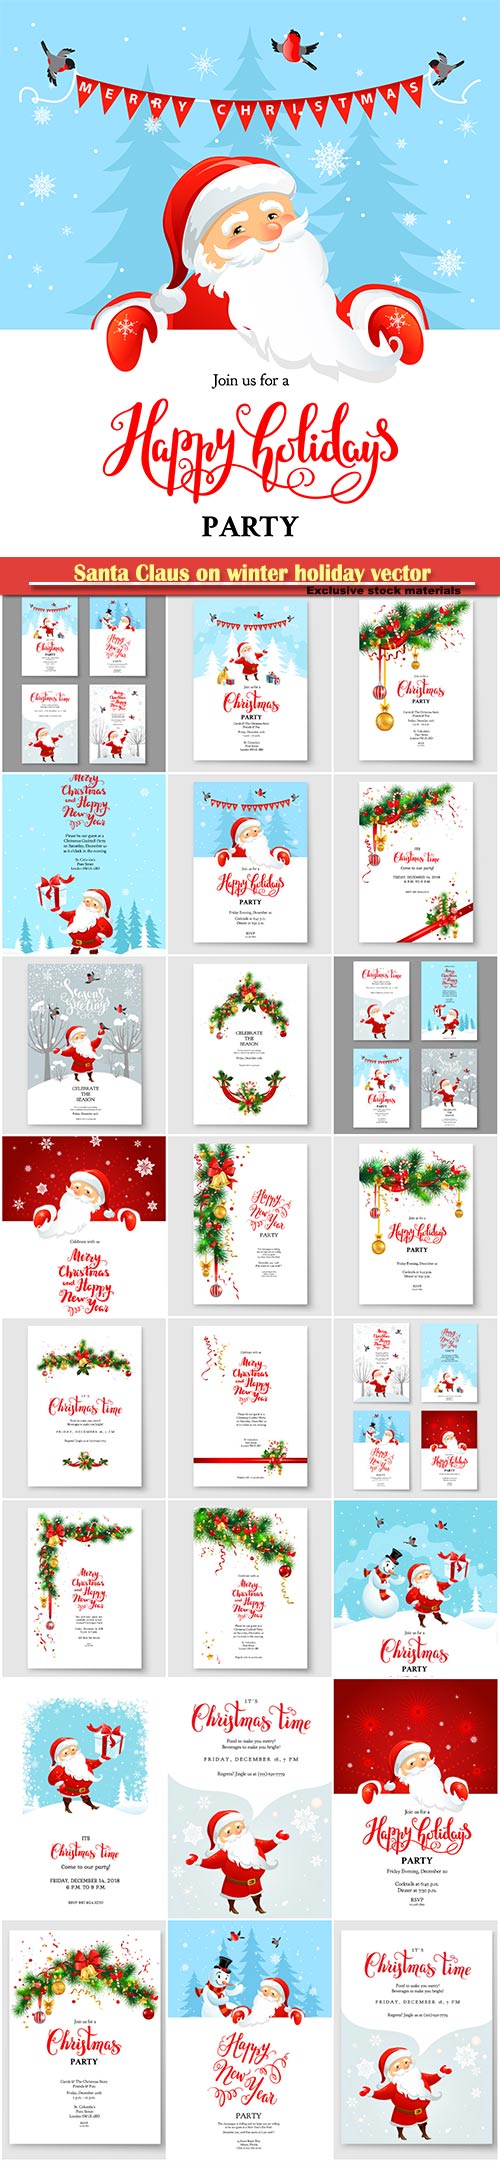 Santa Claus on winter holiday vector invitation, Christmas sample for banne ...